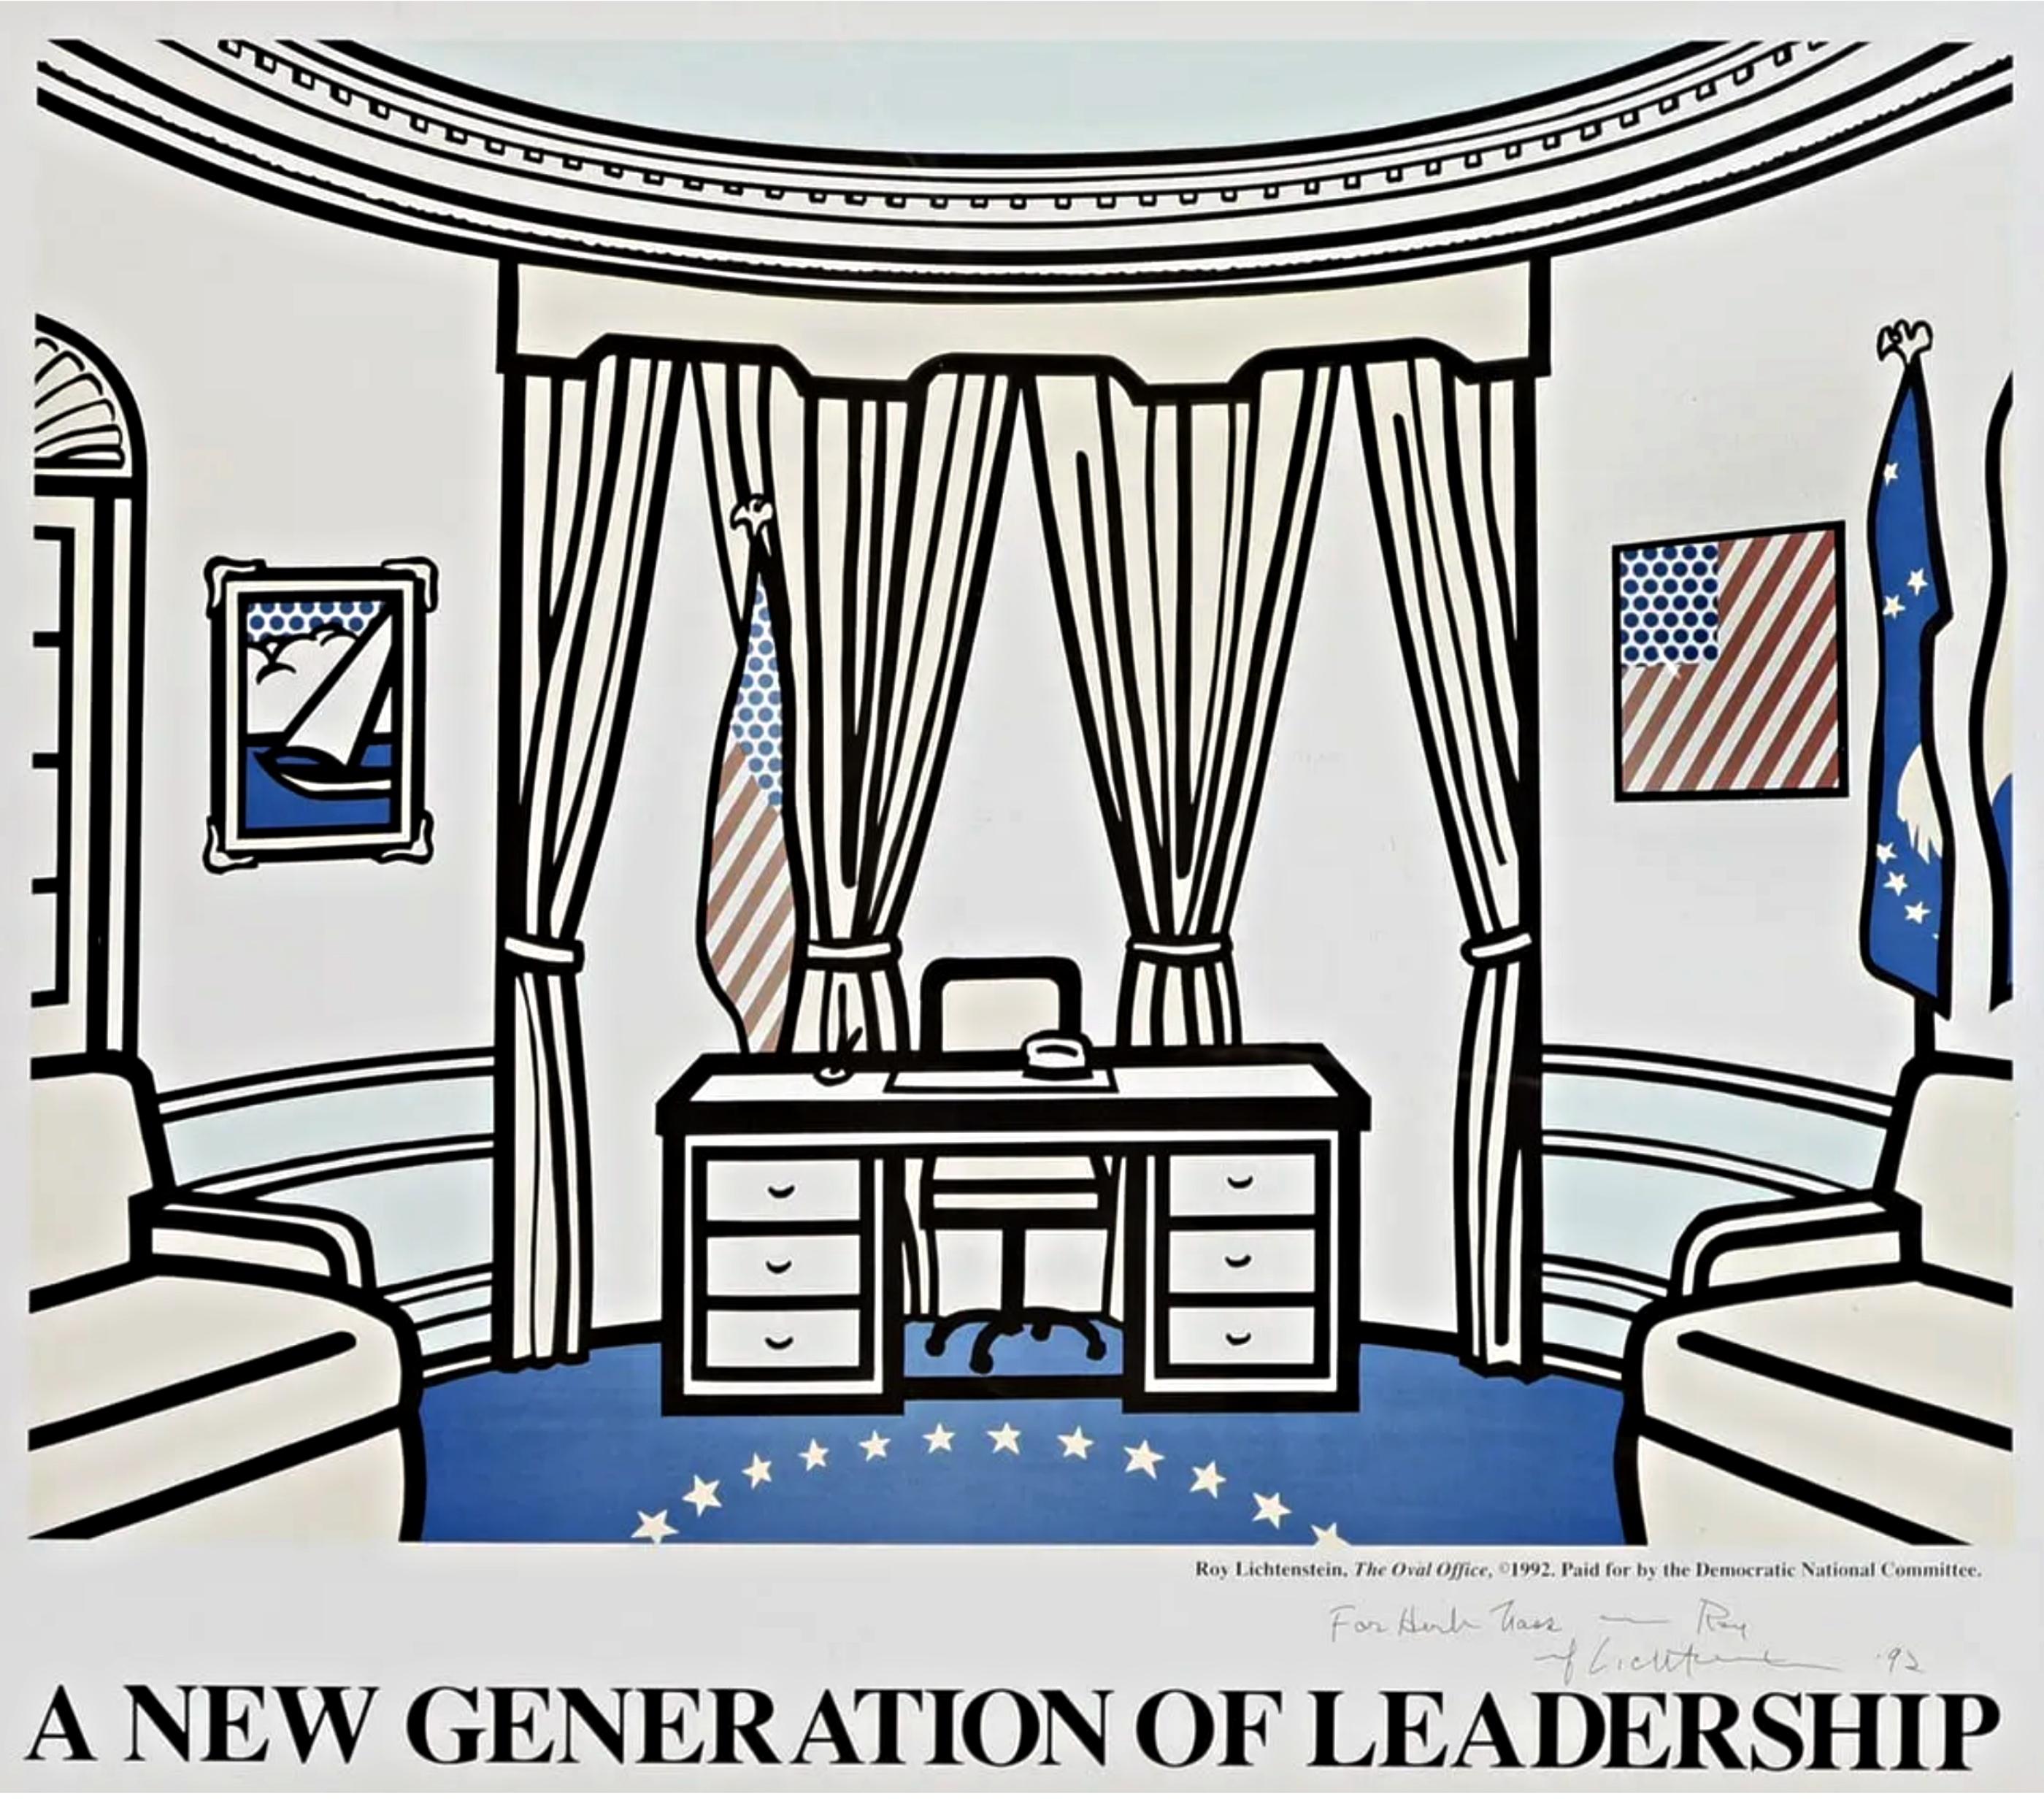 Roy Lichtenstein
The Oval Office (hand signed, dated and inscribed by Roy Lichtenstein), 1992
Offset color lithograph (hand signed and inscribed to famous estate attorney)
Edition of 500 (the regular edition was 500, though this is uniquely hand